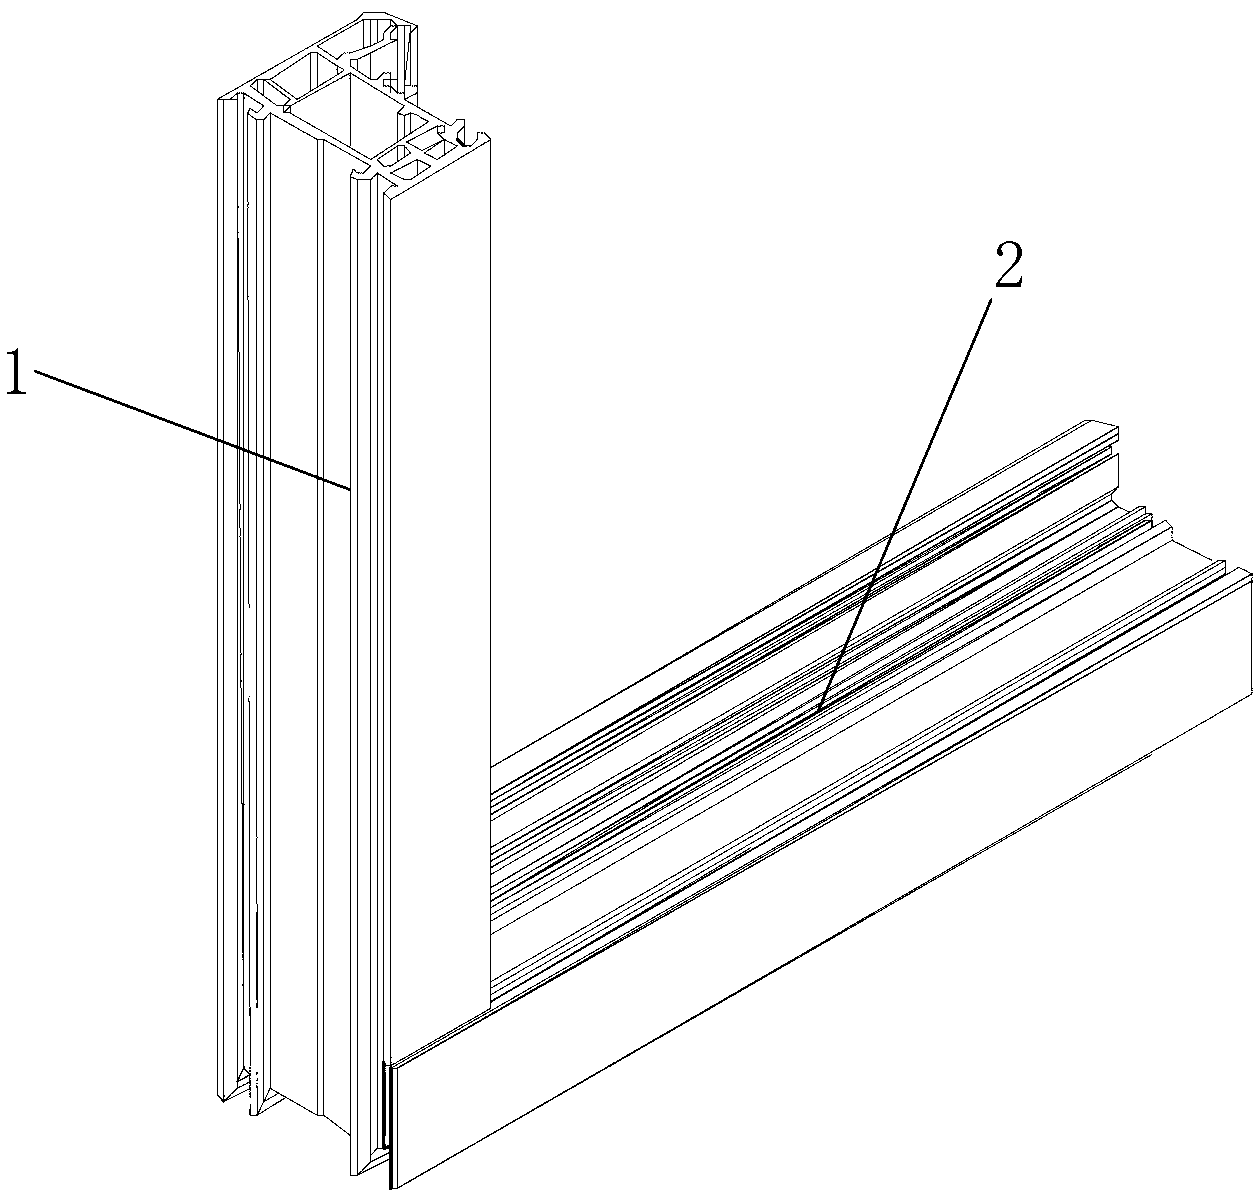 Novel corner connection structure for door and window profiles